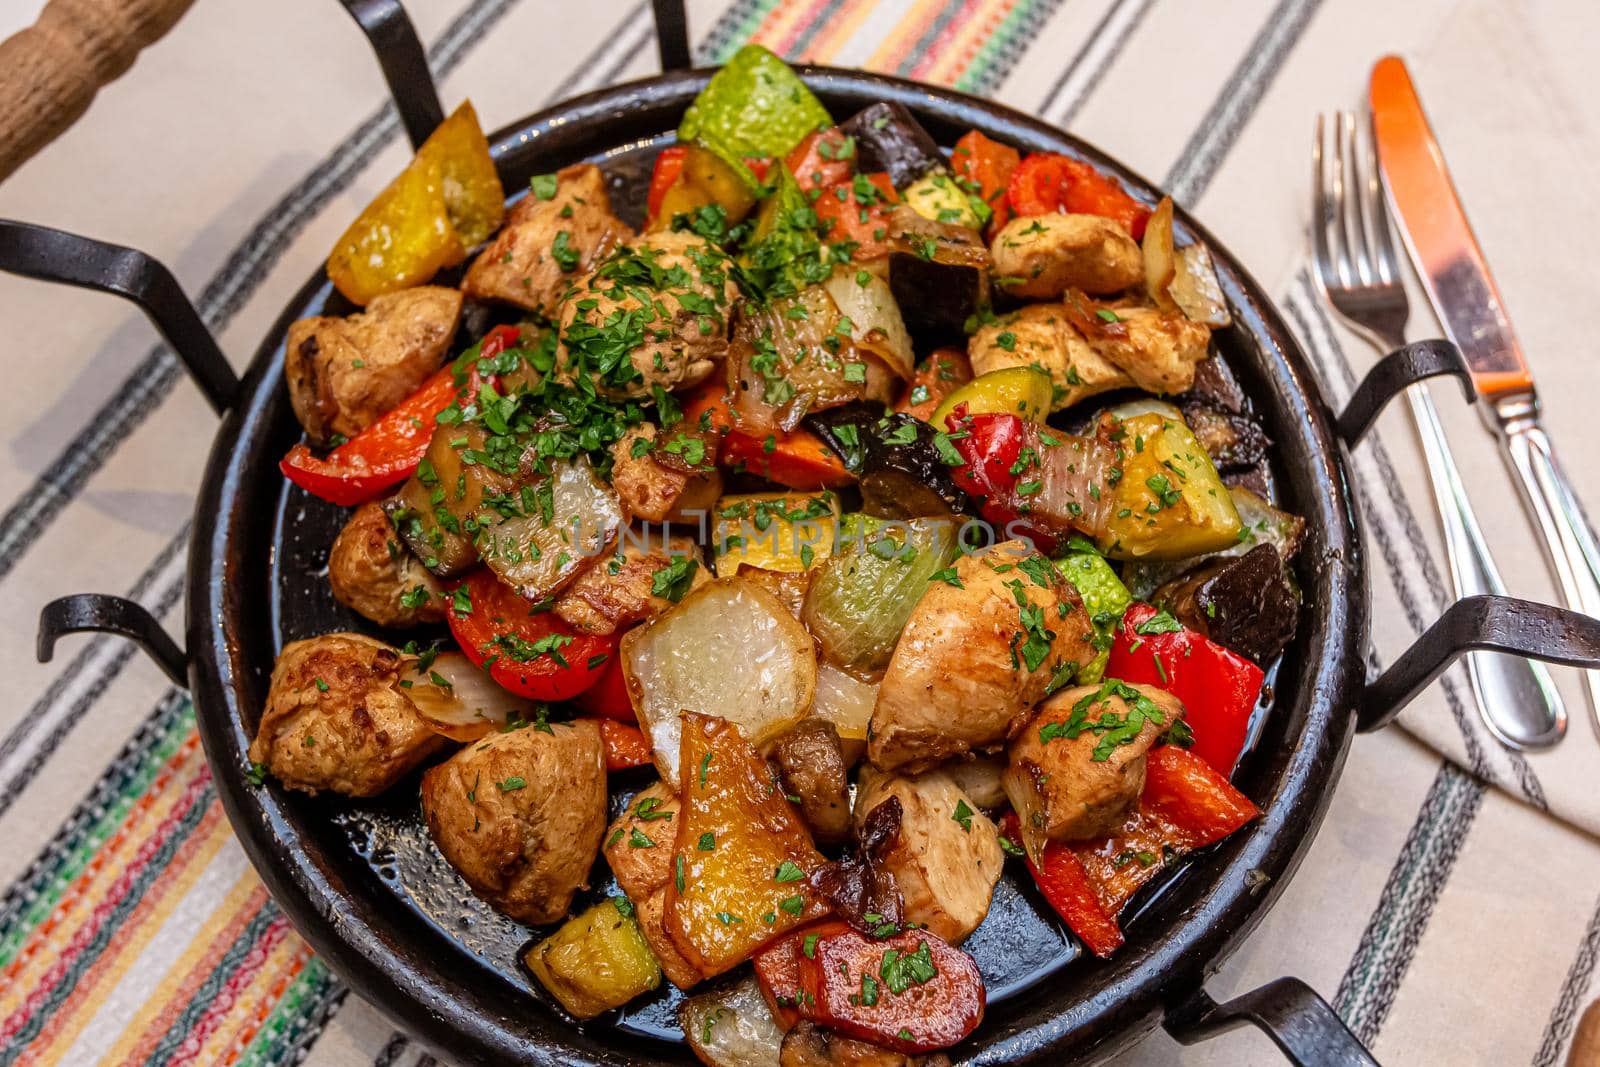 Pan-fried potatoes, meat and vegetables for a large company by Milanchikov